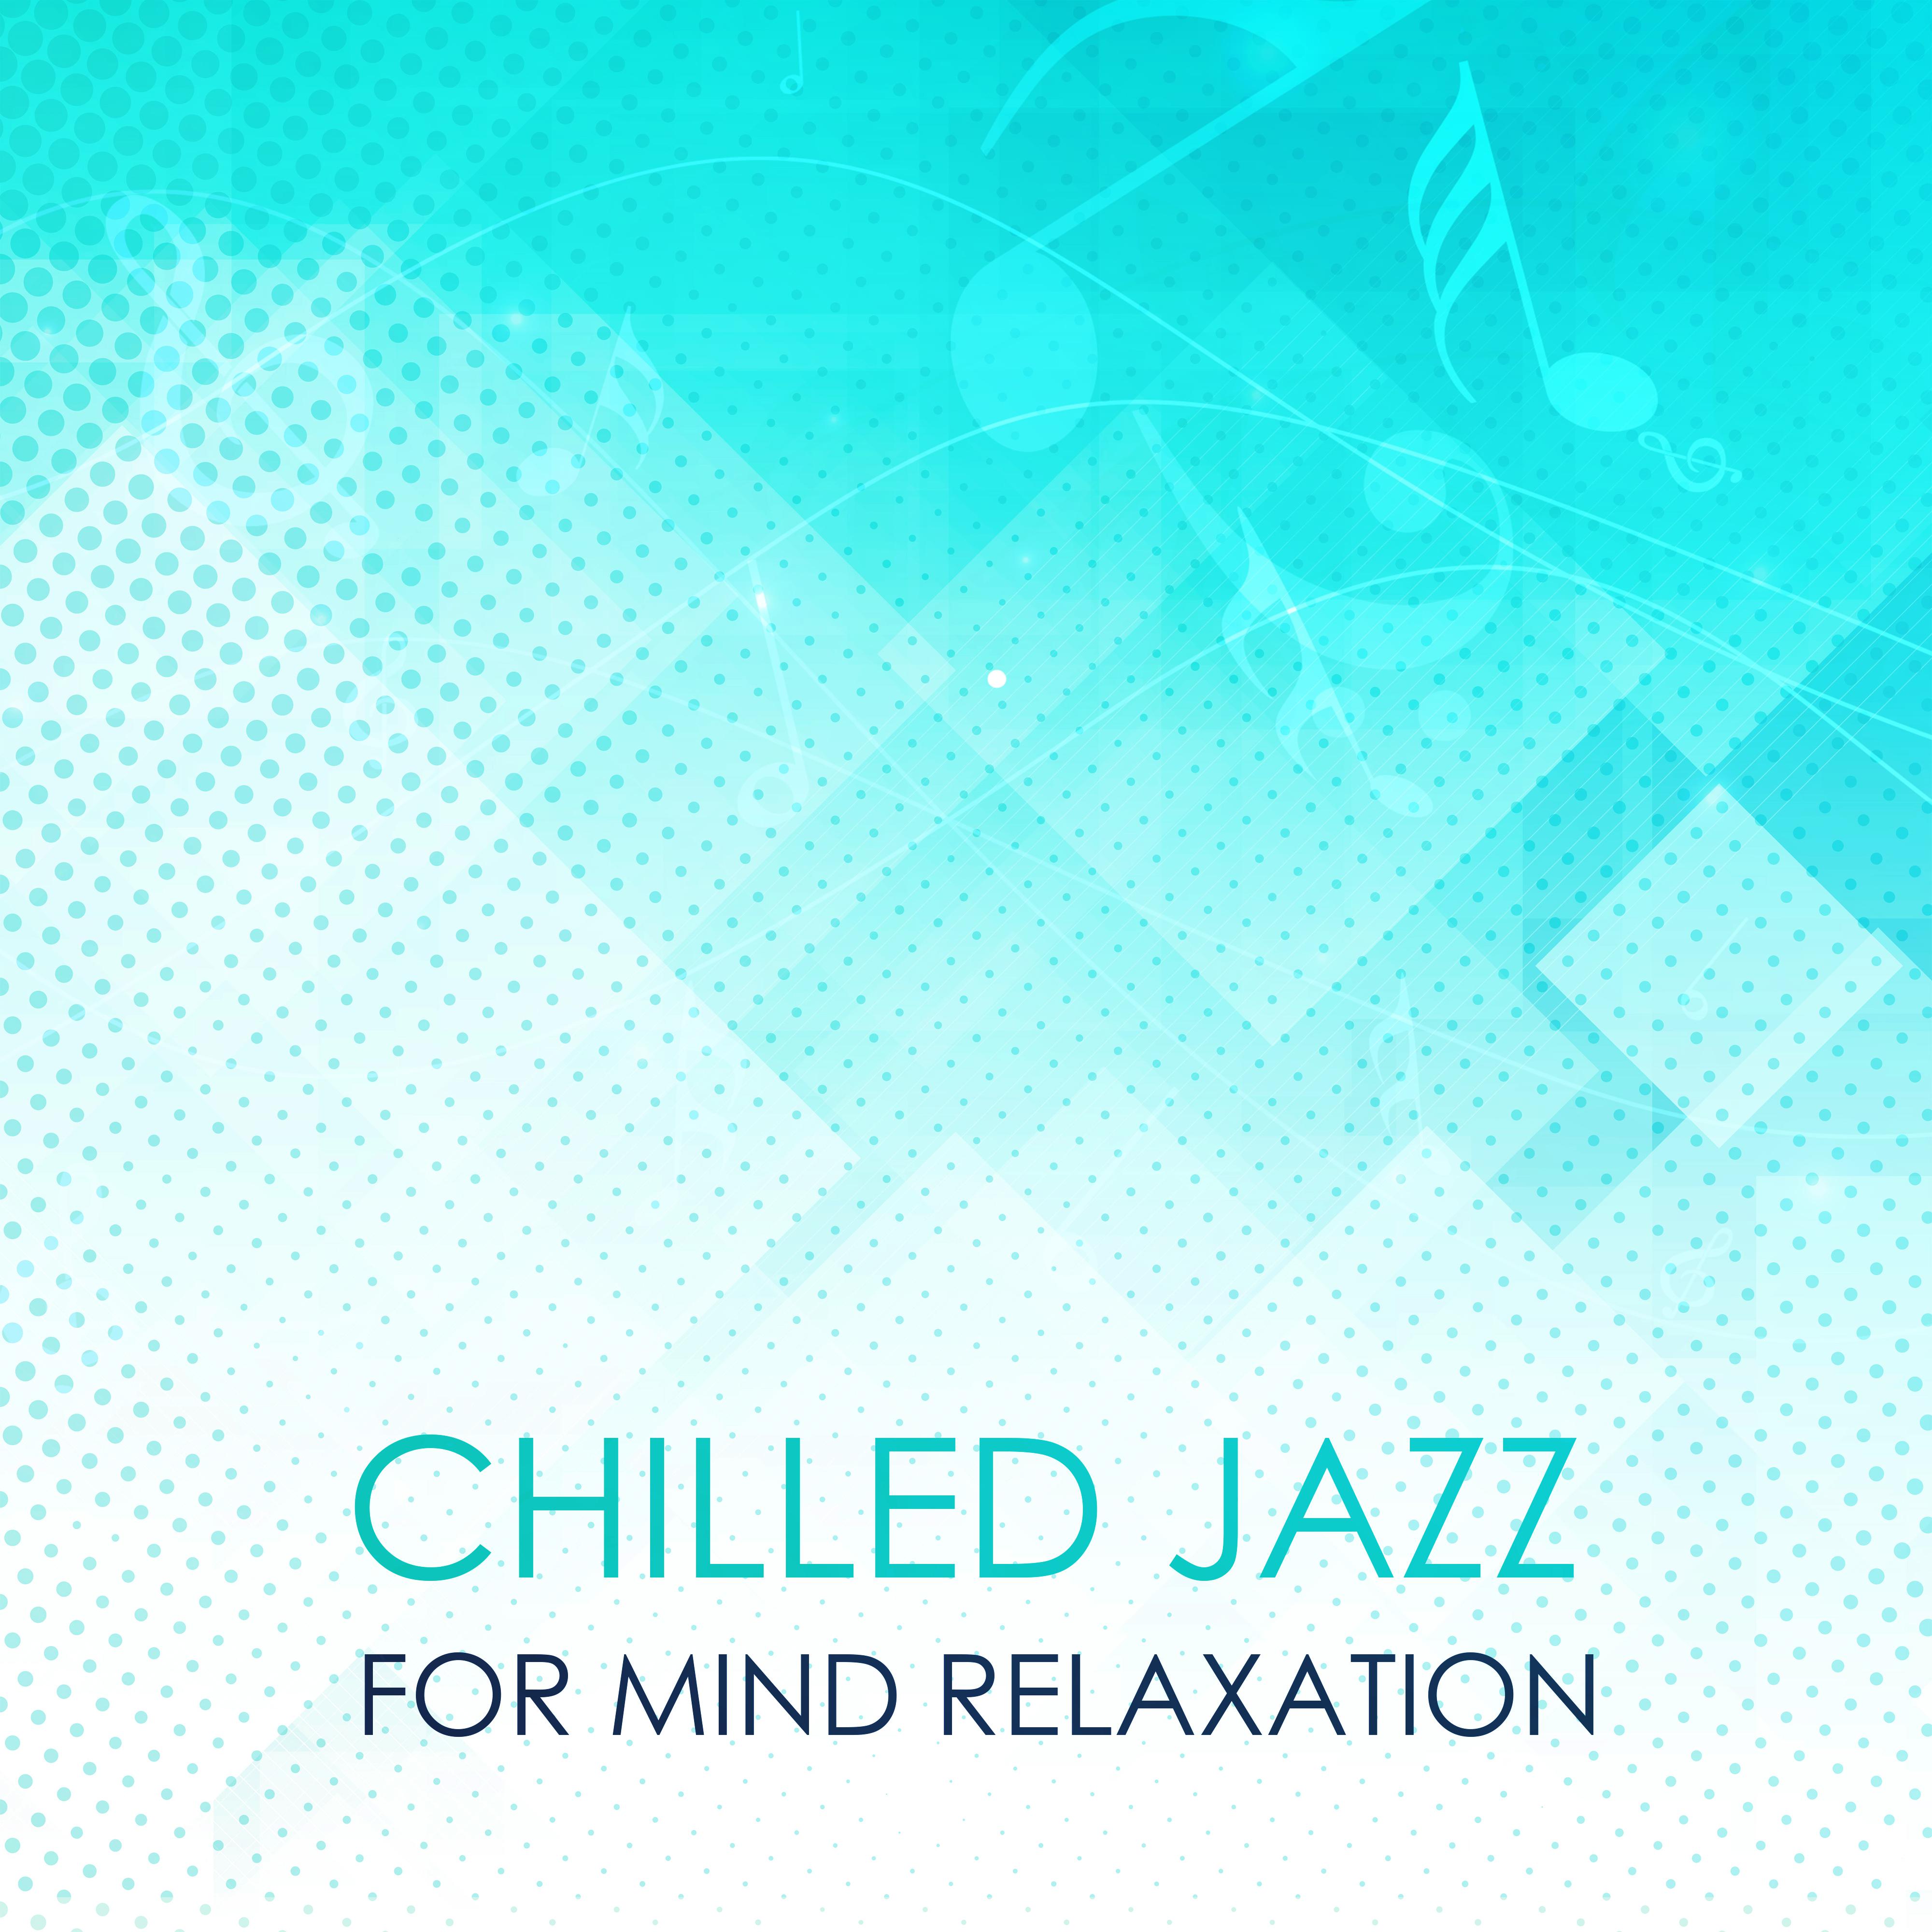 Chilled Jazz for Mind Relaxation